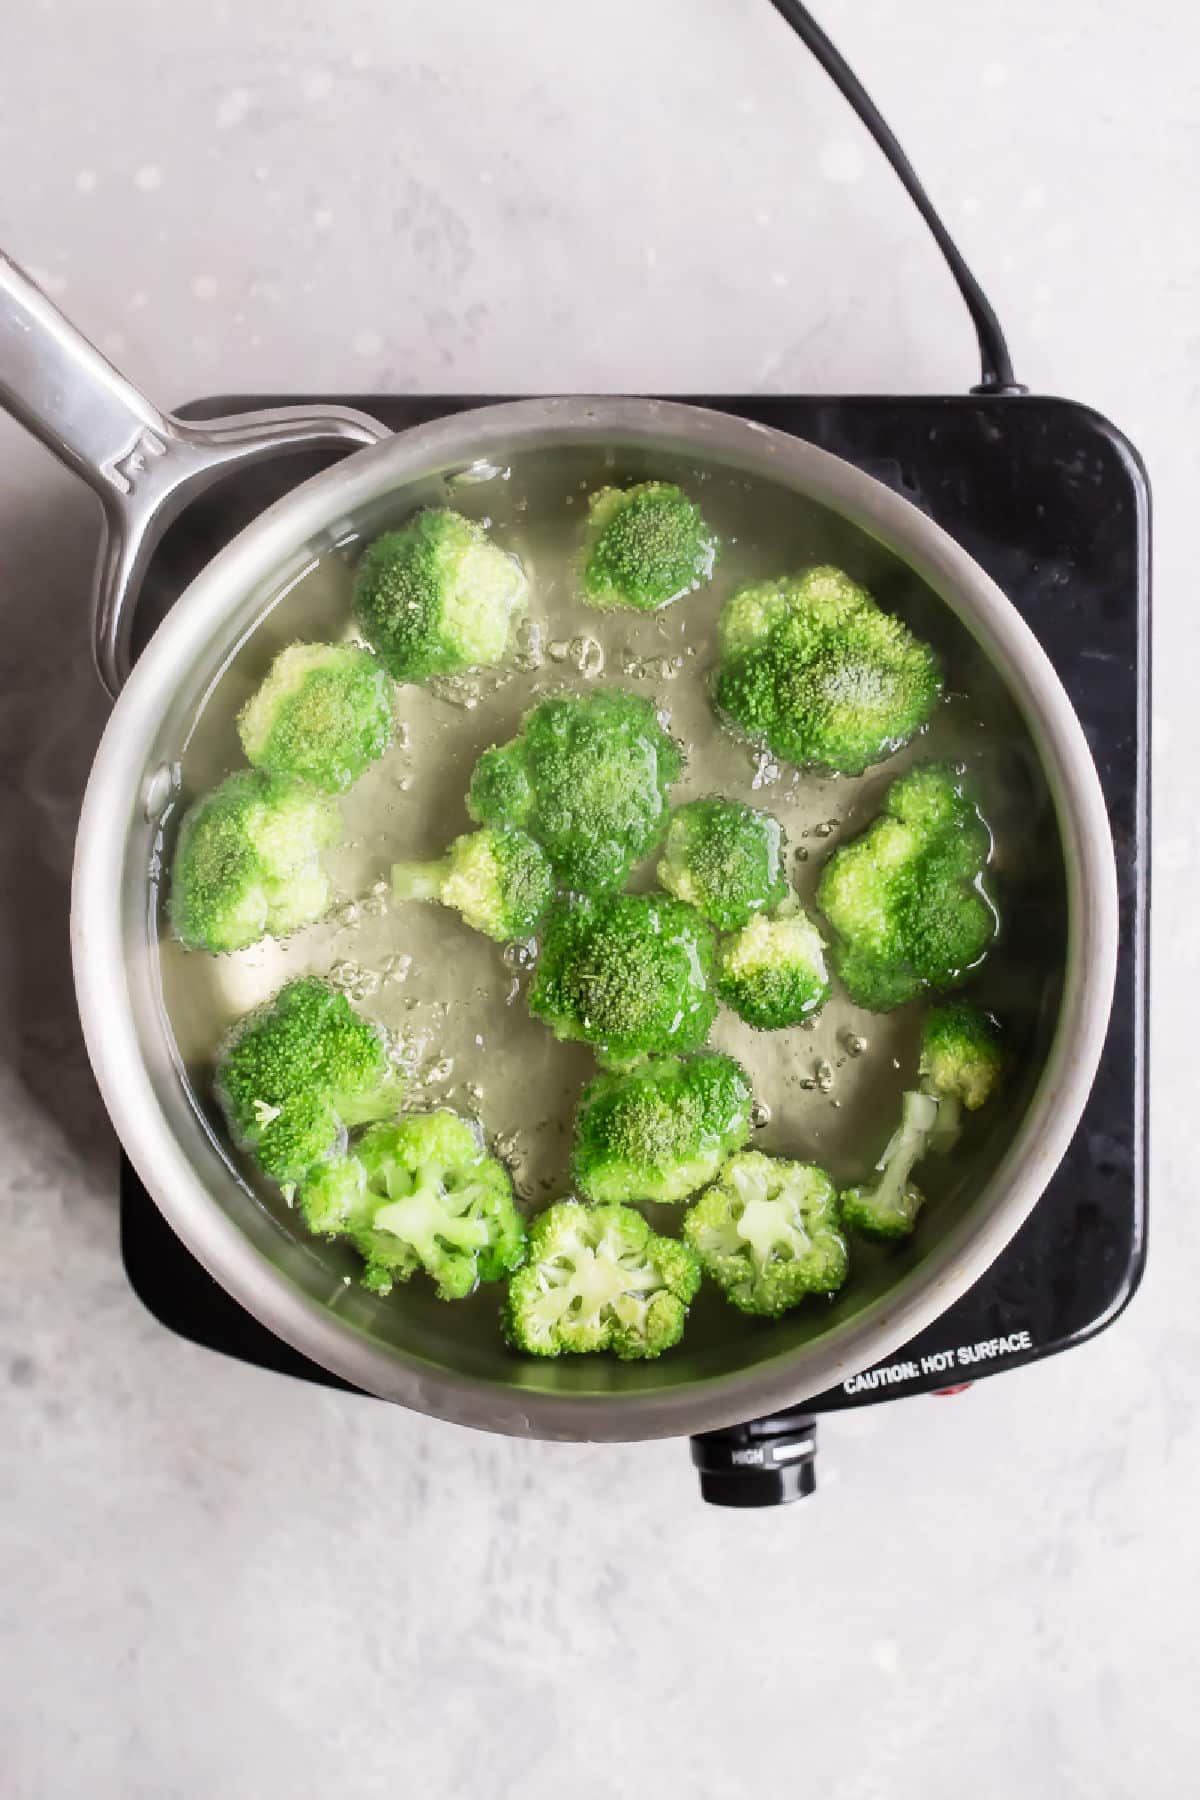 Broccoli cooking in boiling water in a silver pot.